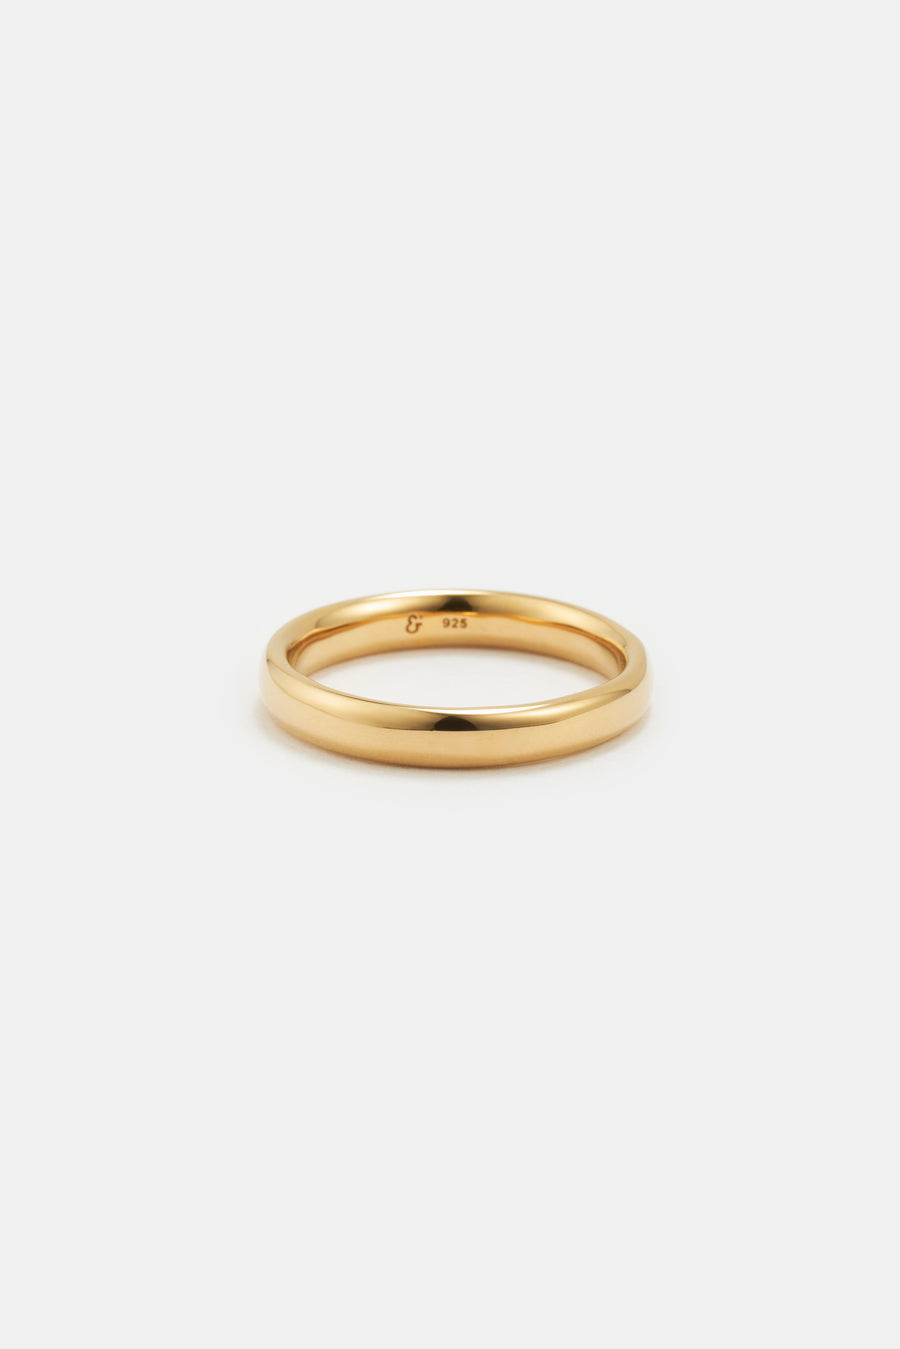 CLASSIC PHOEBE RING 101 GOLD